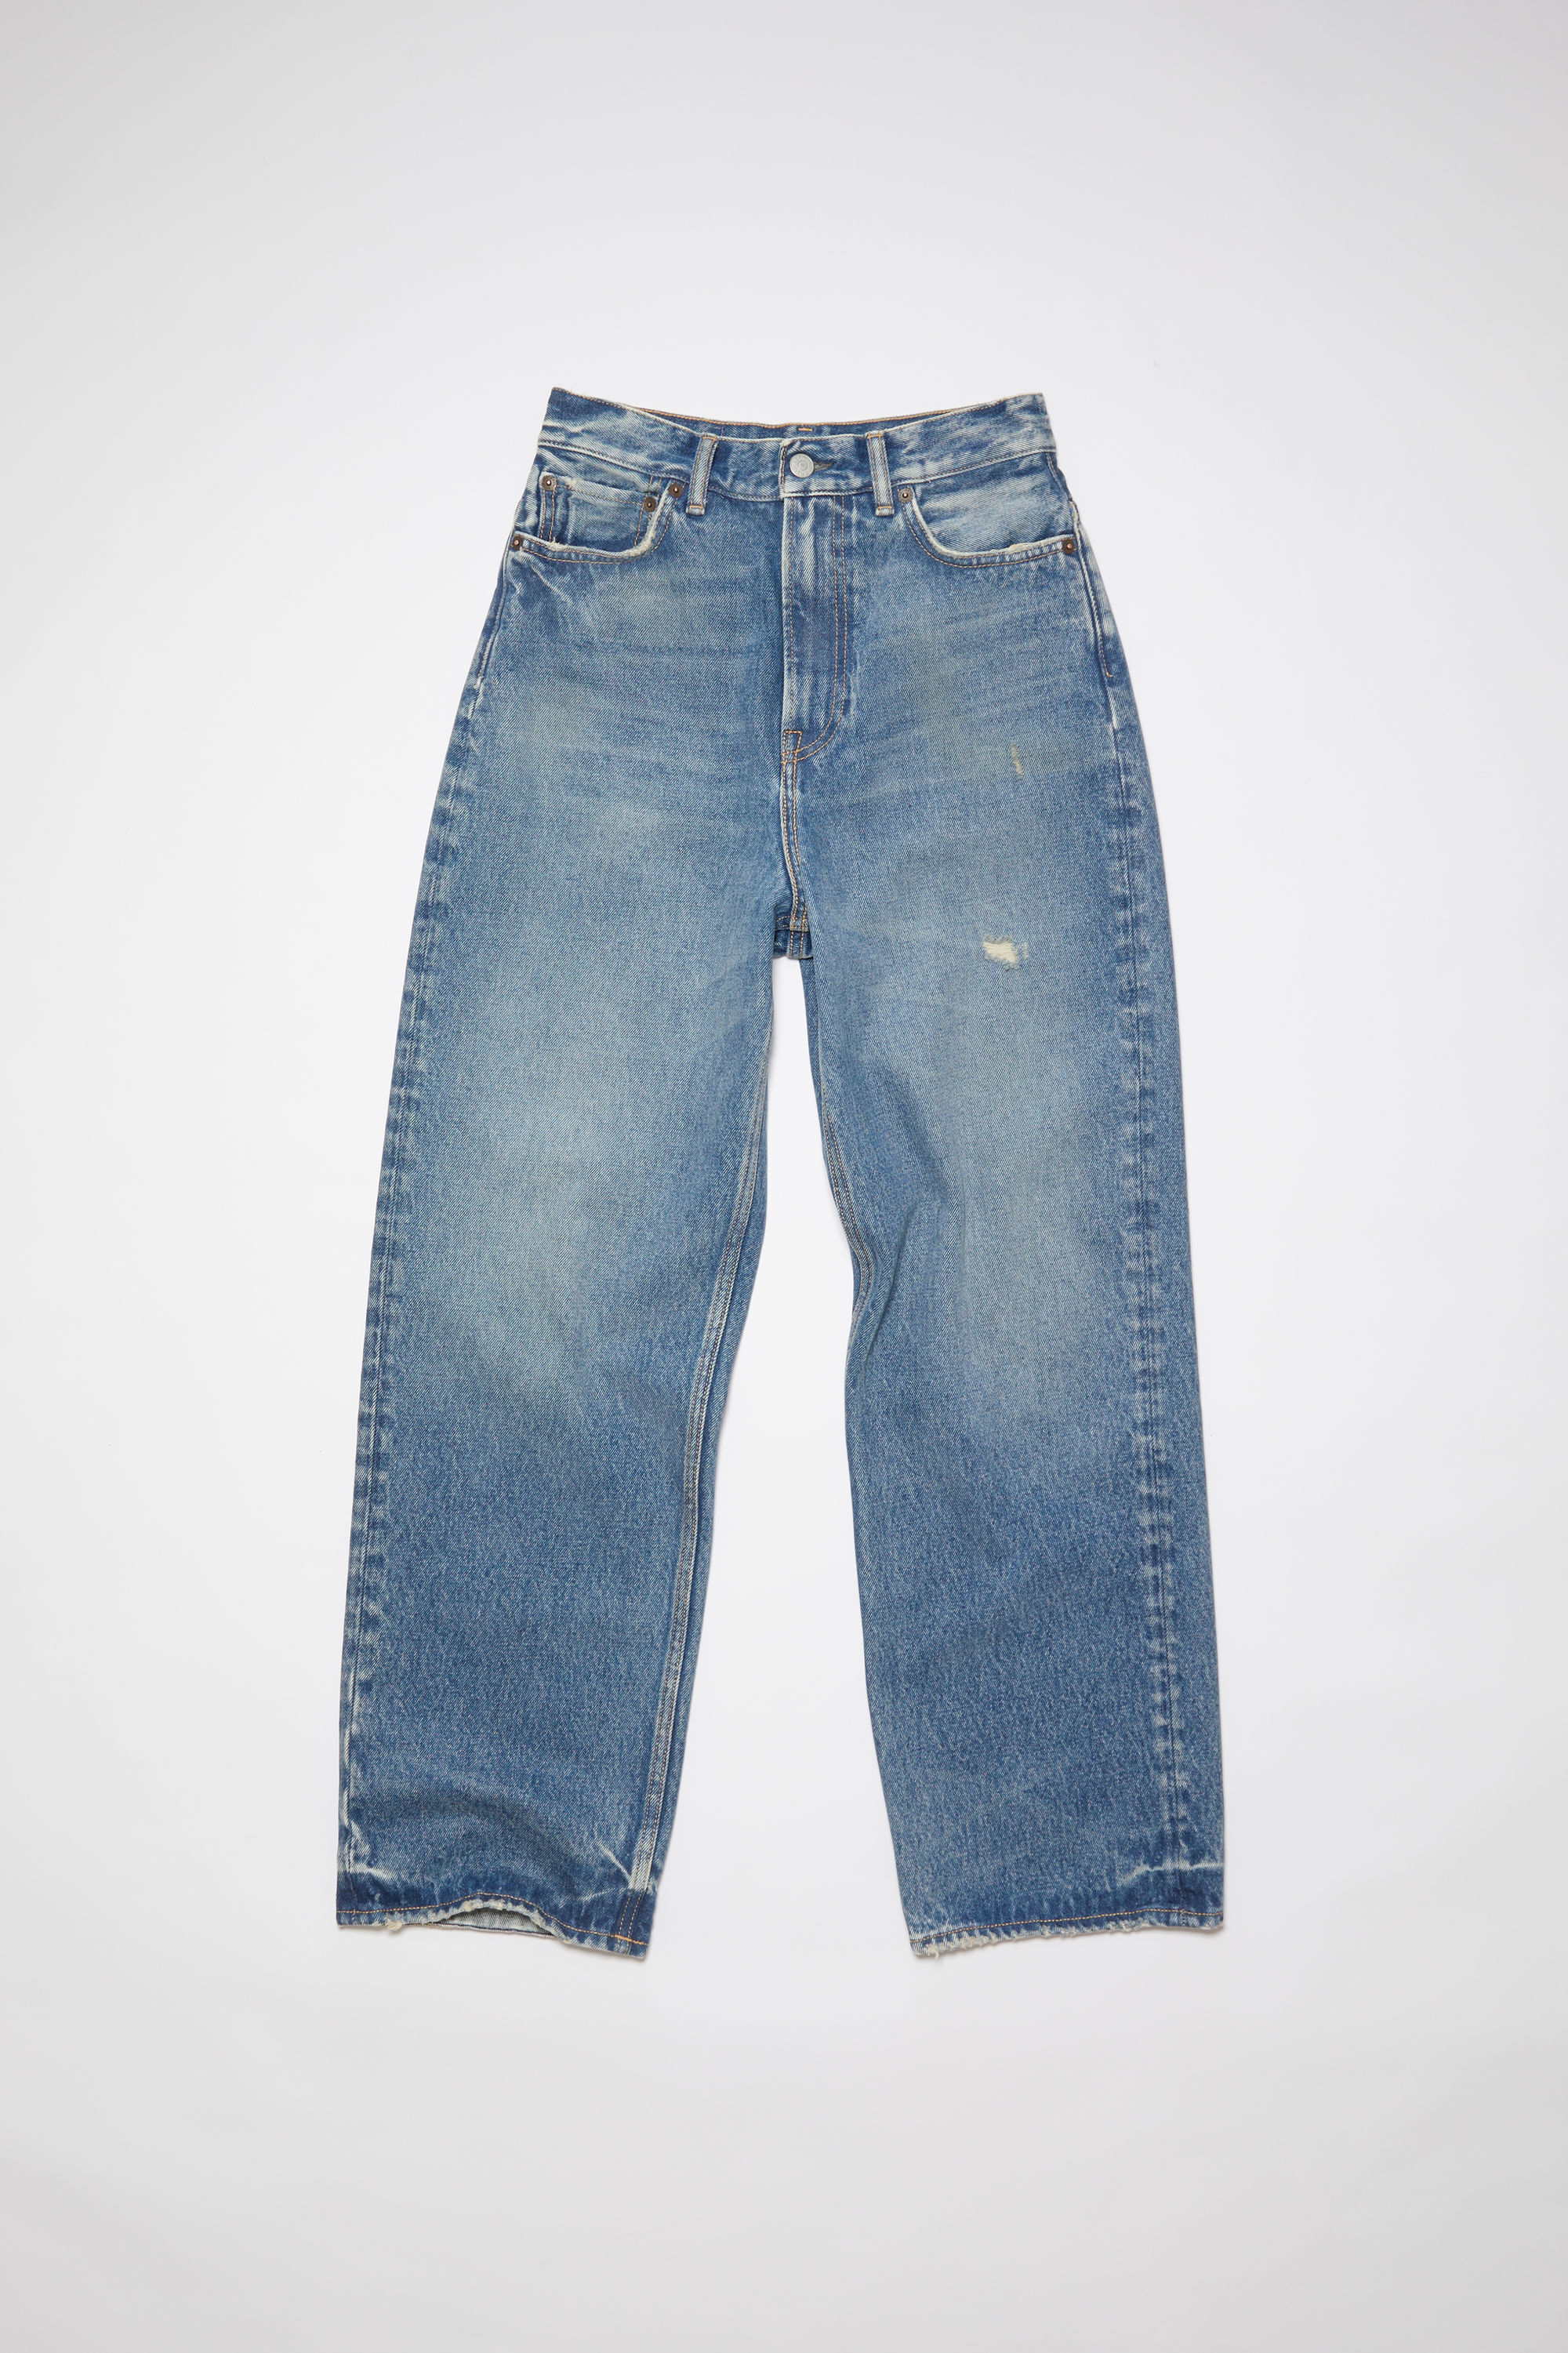 Acne Studios - Relaxed fit jeans -1993 - Mid Blue